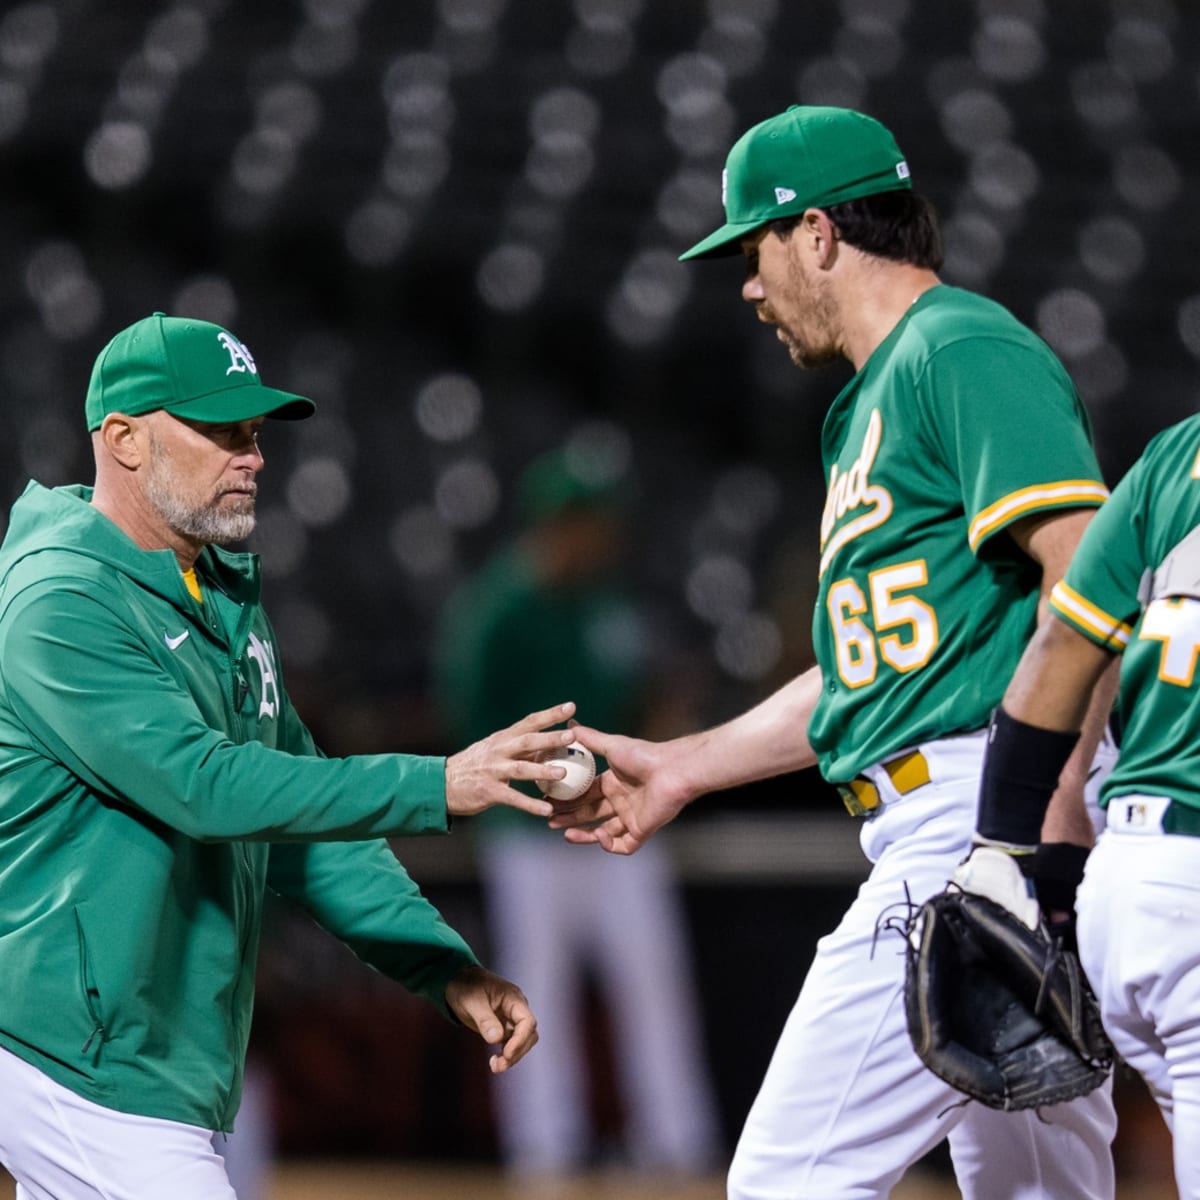 In an unusual year, Oakland Athletics put in their usual winning